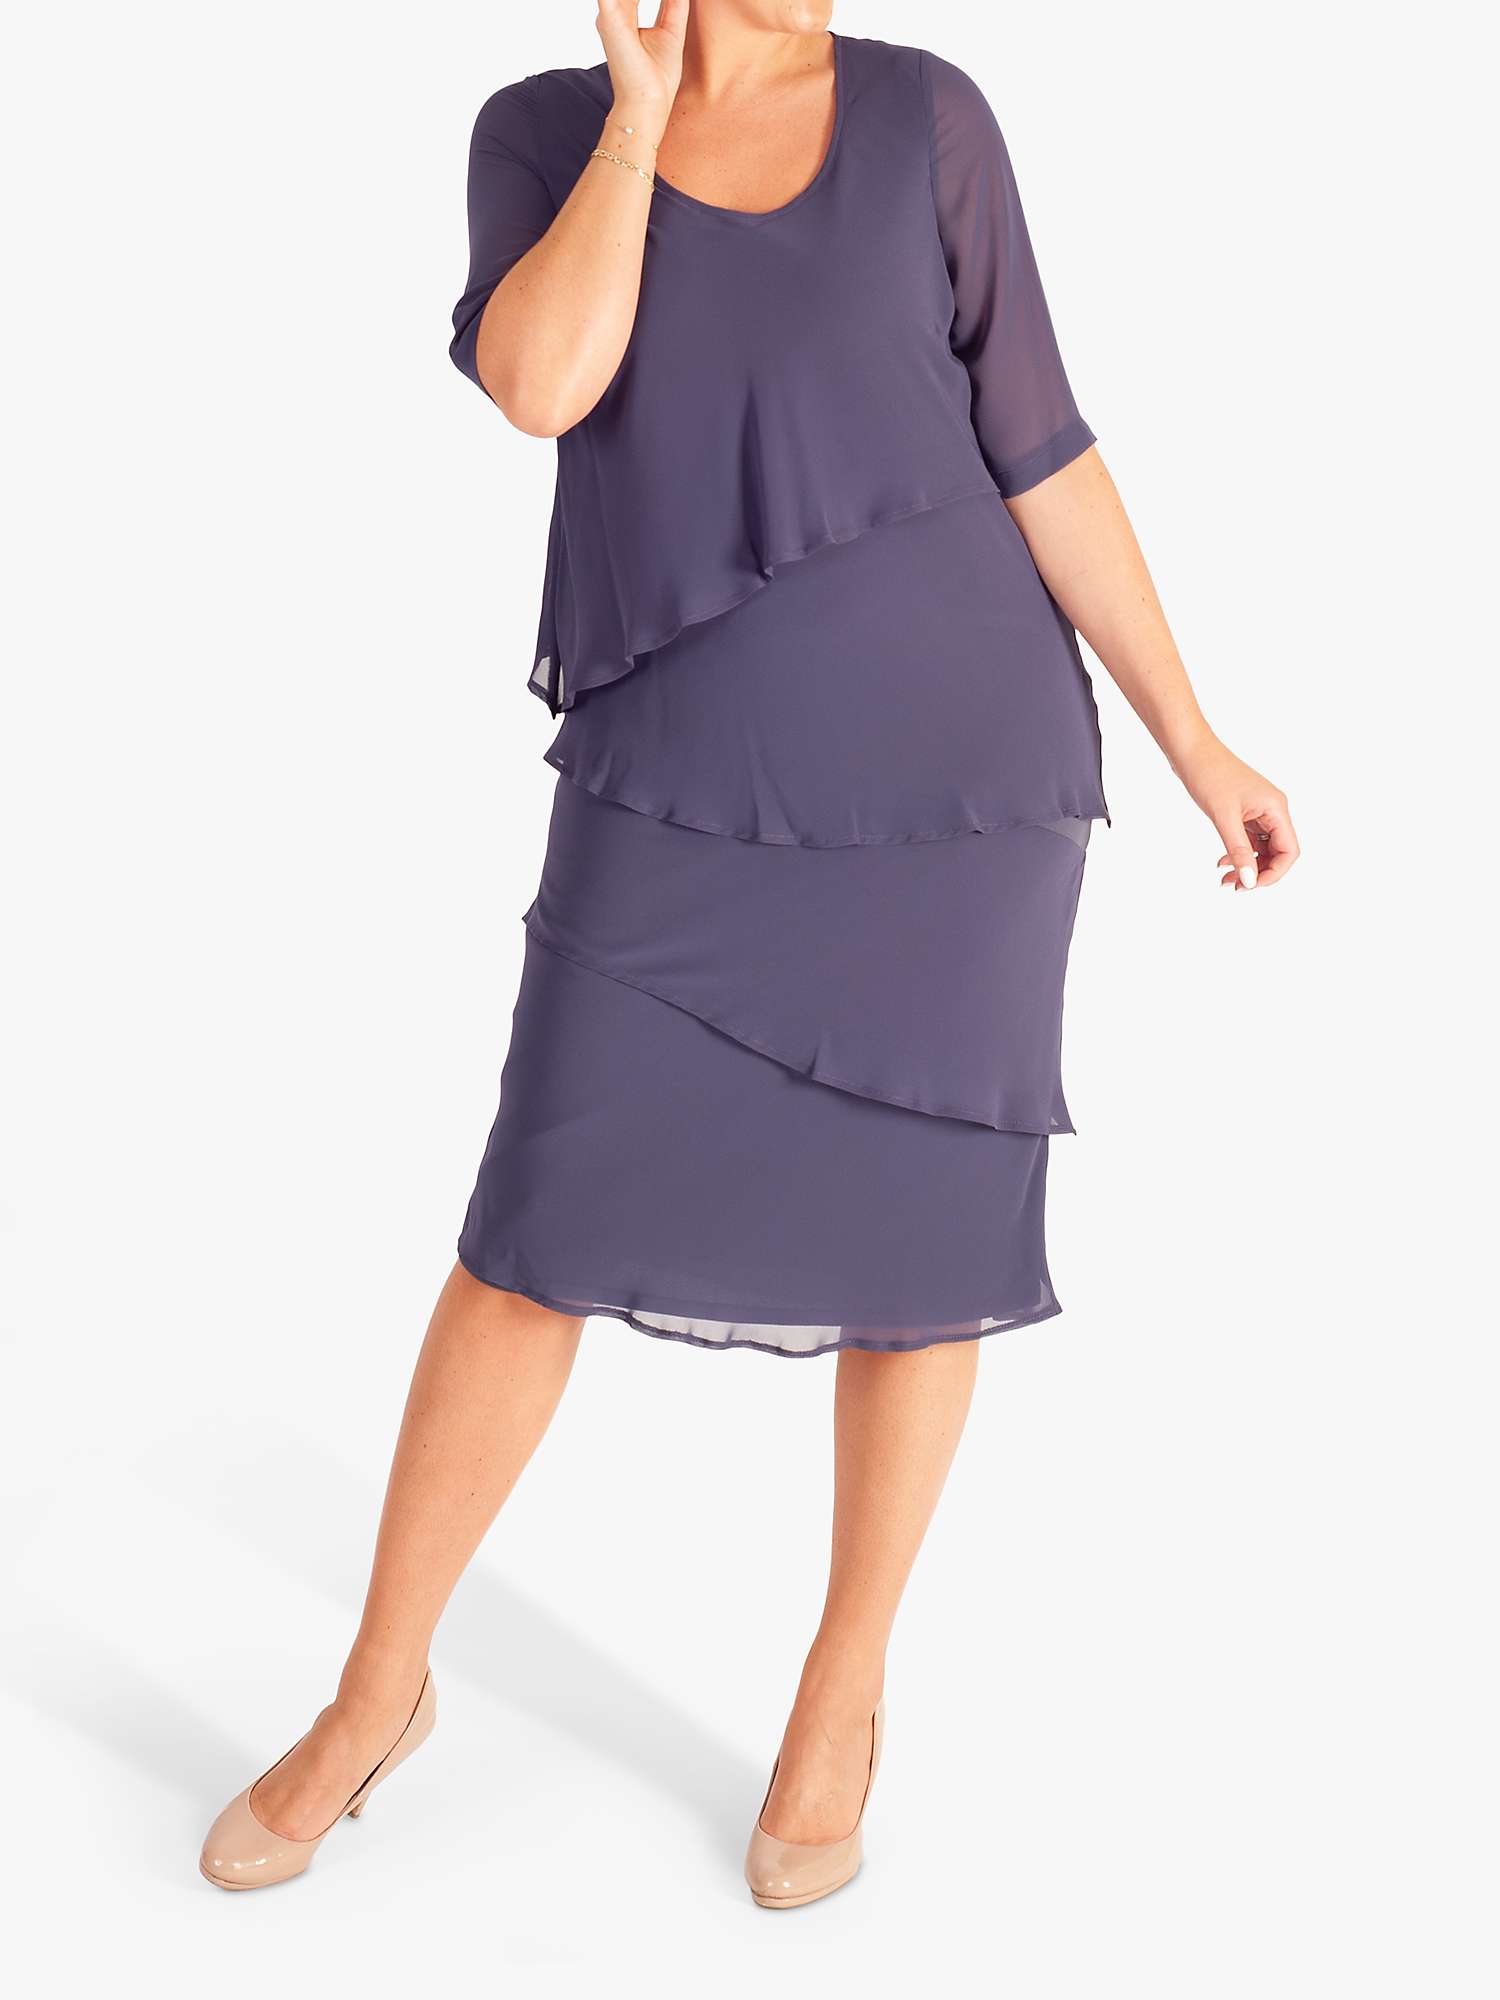 Buy chesca Layered Chiffon Knee Length Dress Online at johnlewis.com